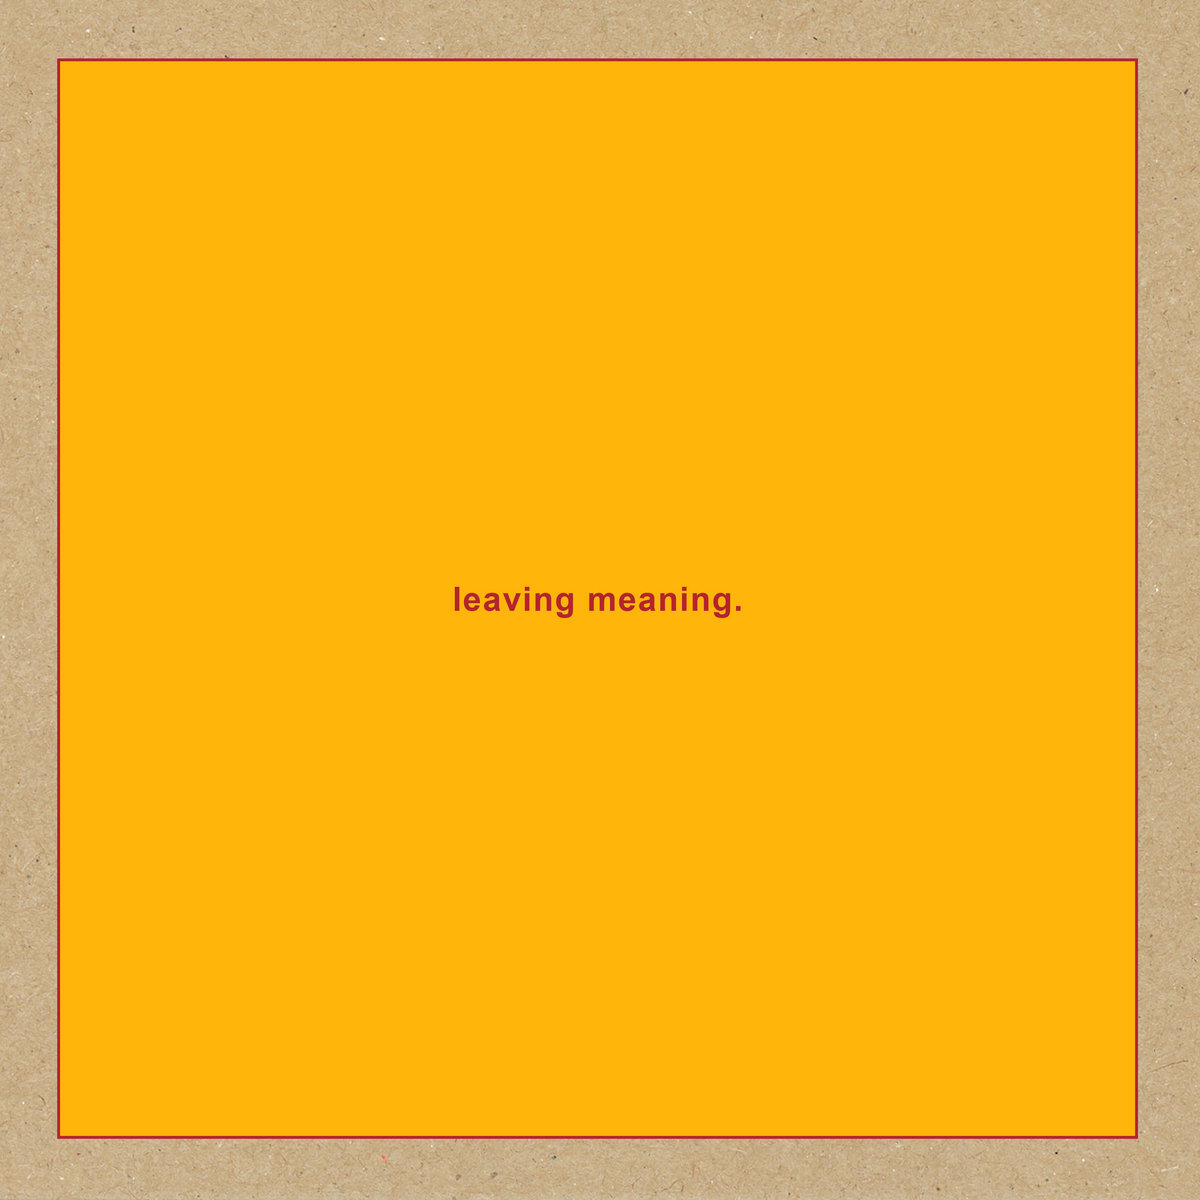 leaving meaning. - SWANS